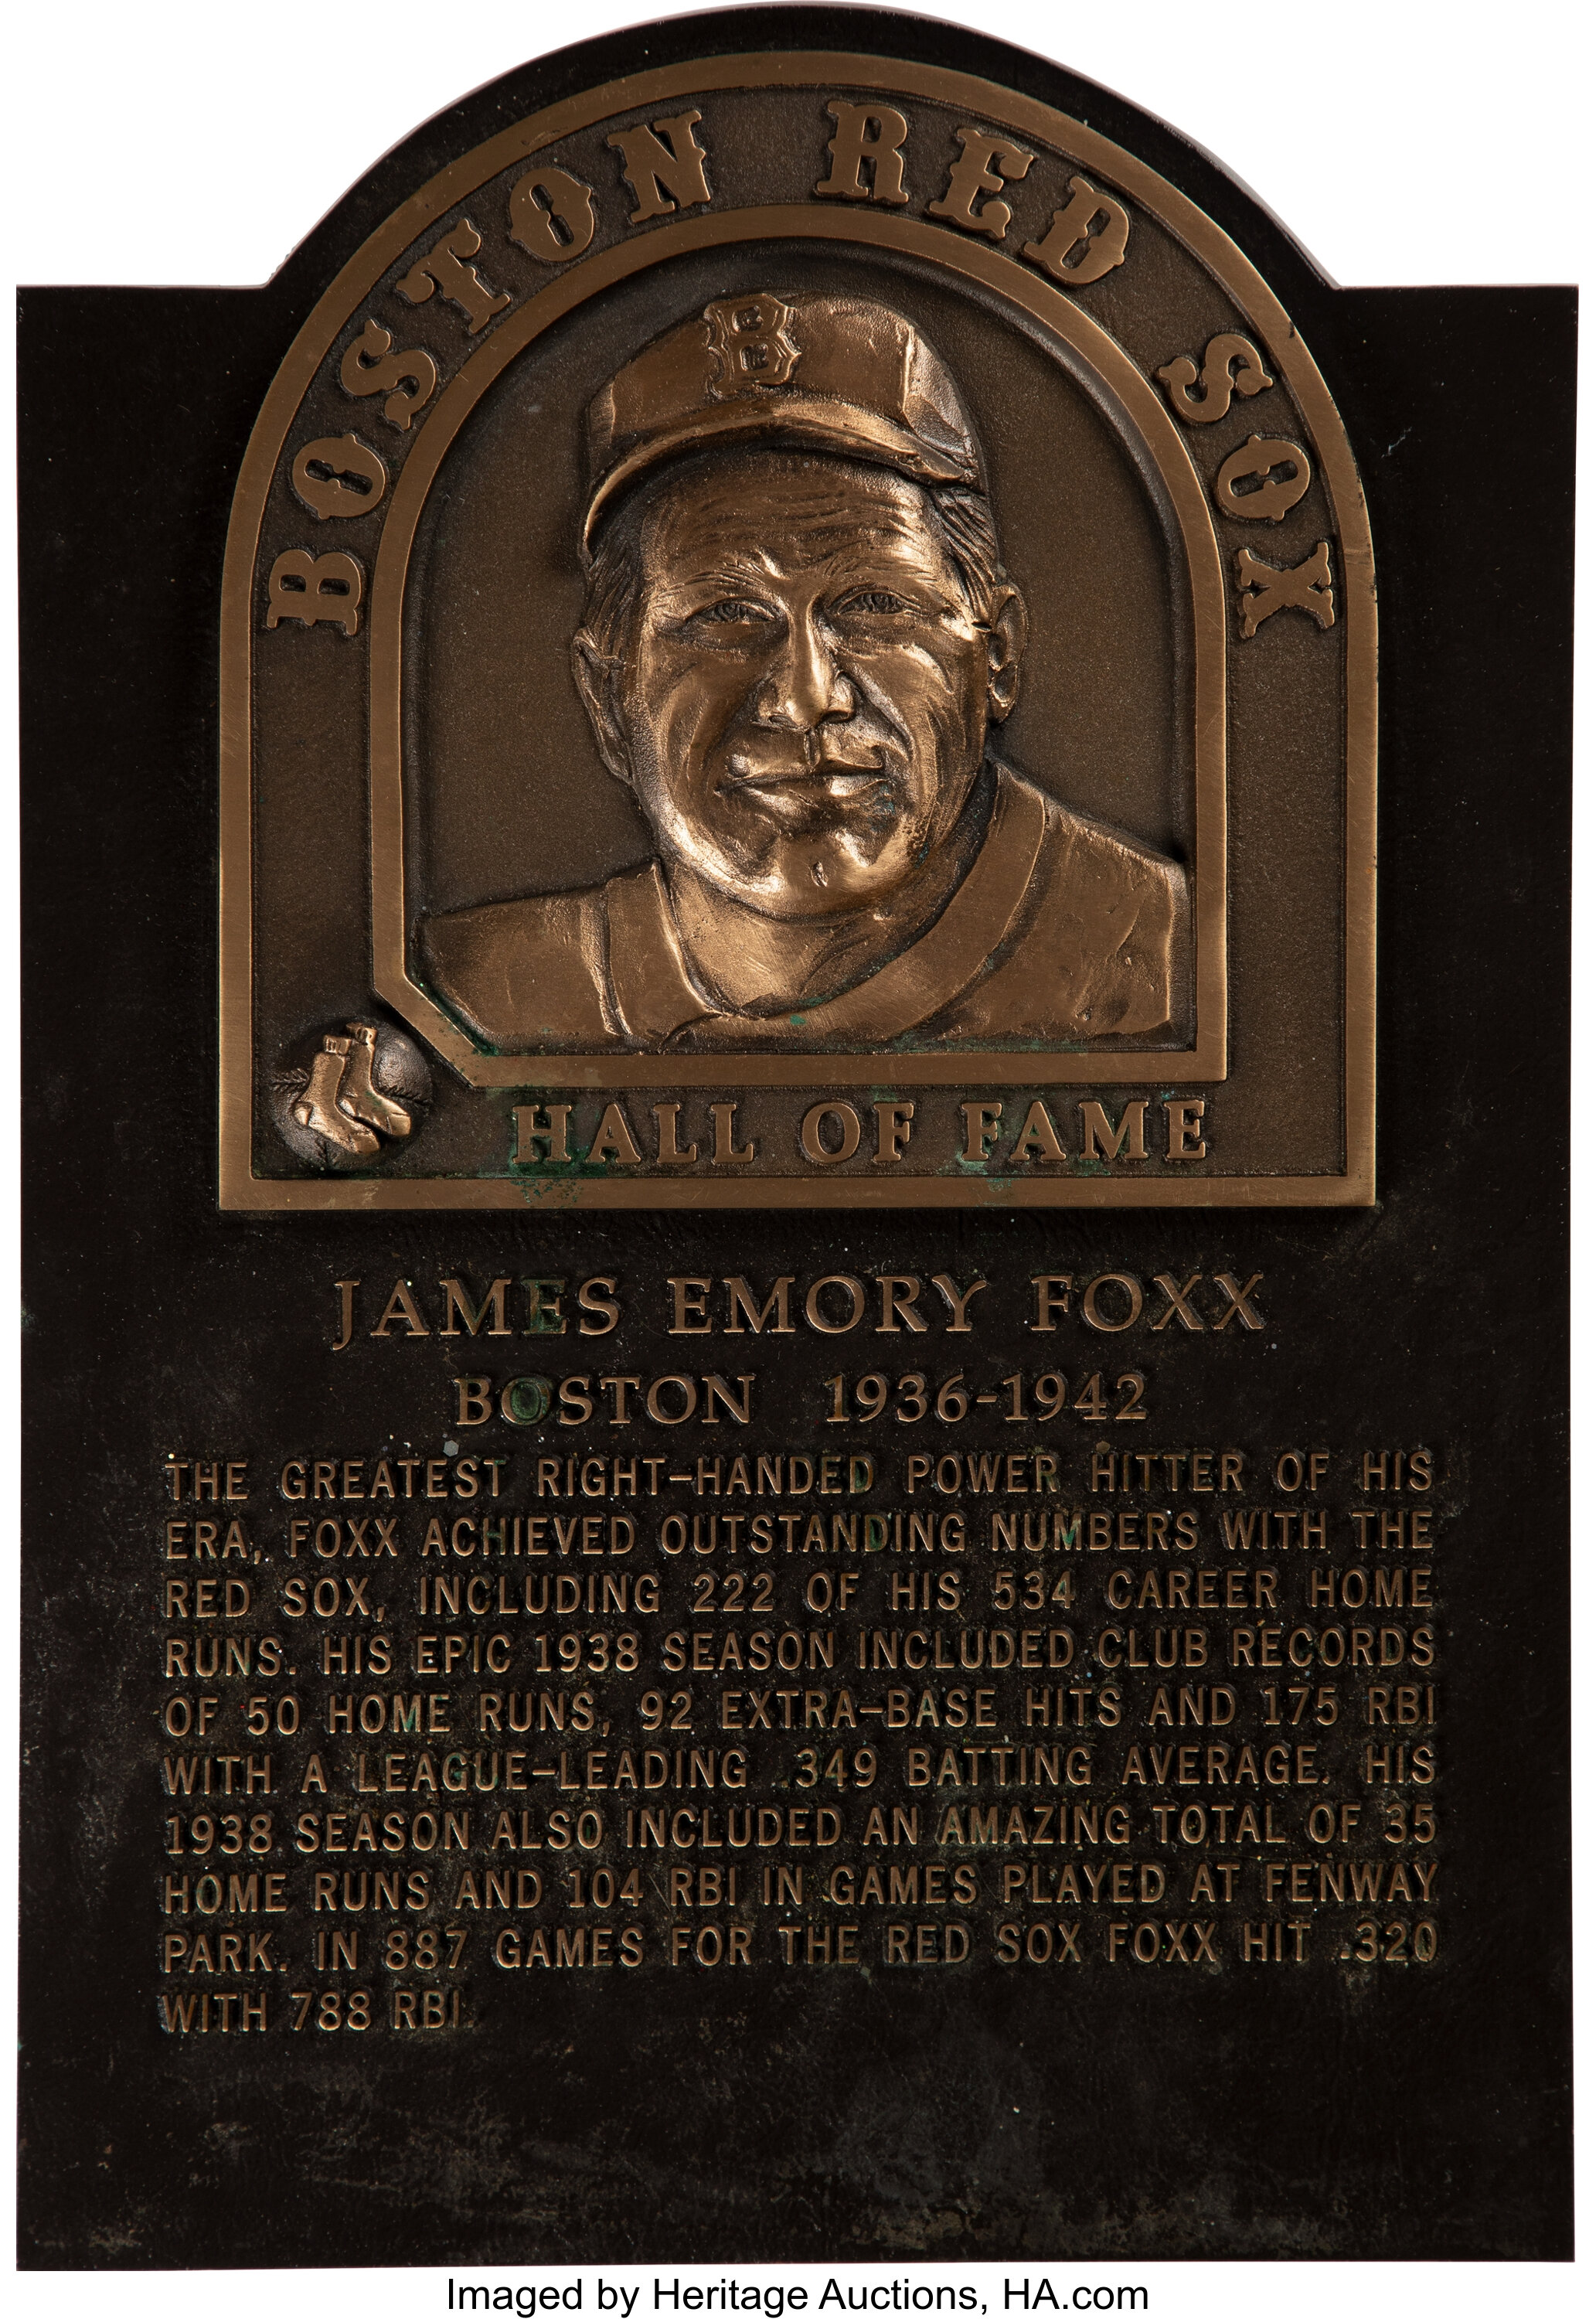 1997 Jimmie Foxx Boston Red Sox Hall of Fame Induction Plaque., Lot  #58888